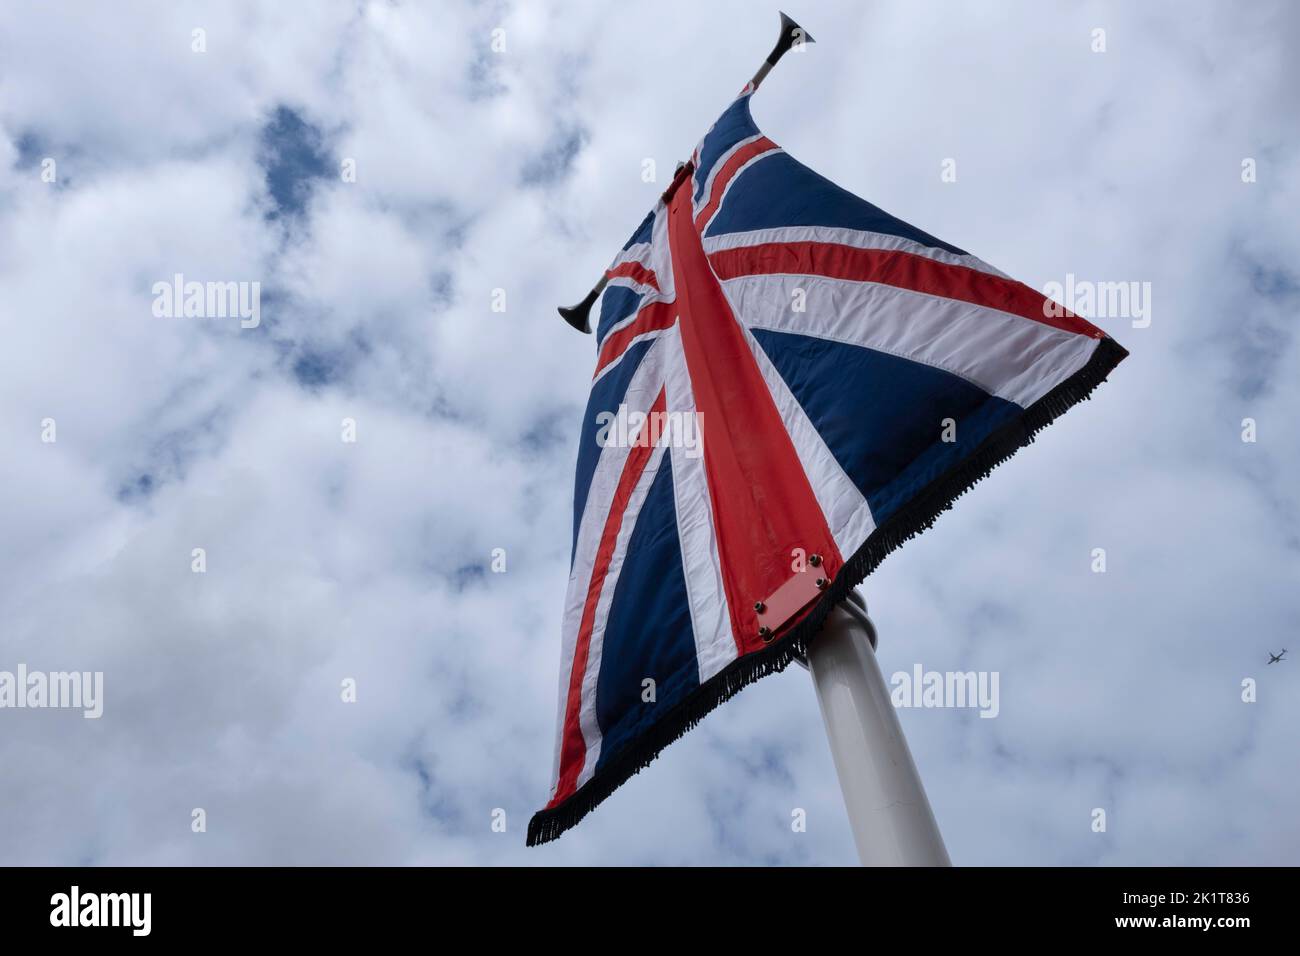 British national flag like a banner on a pole fluttering in the wind against a cloudy sky. Plane in background Stock Photo